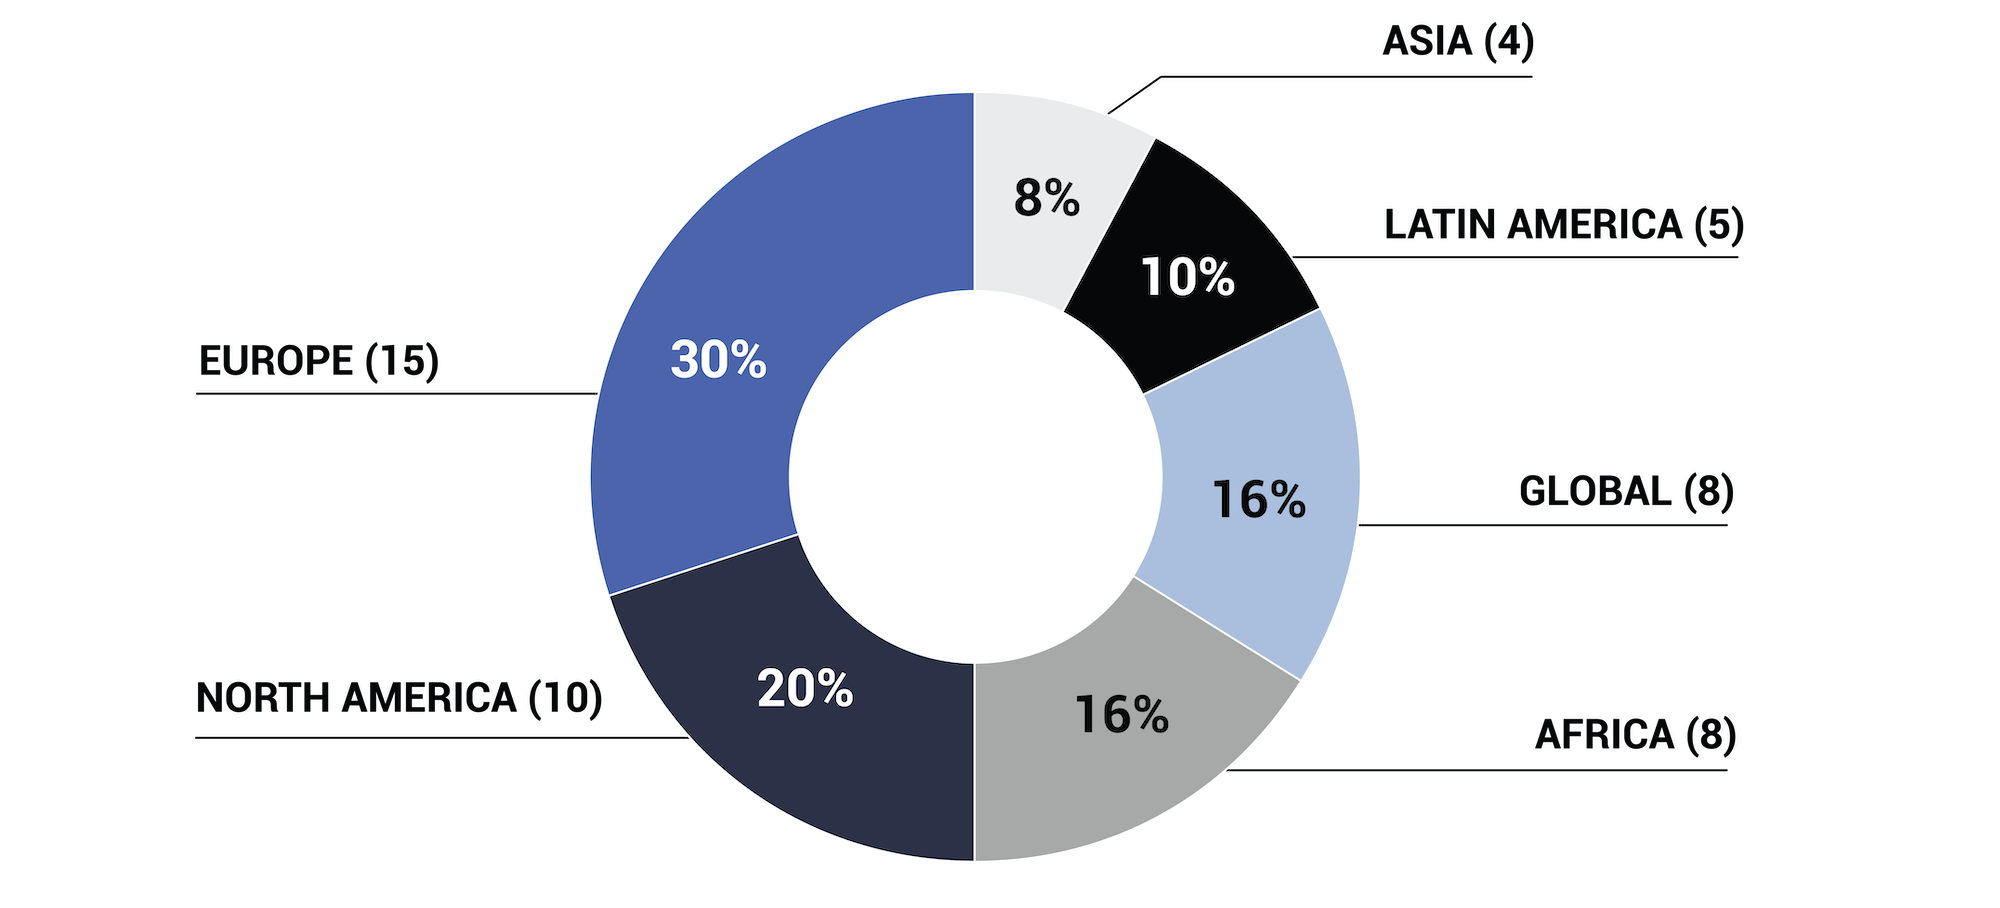 Figure 8 is a donut chart illustrating the number and percent of participants based on the geographical focus of their work.